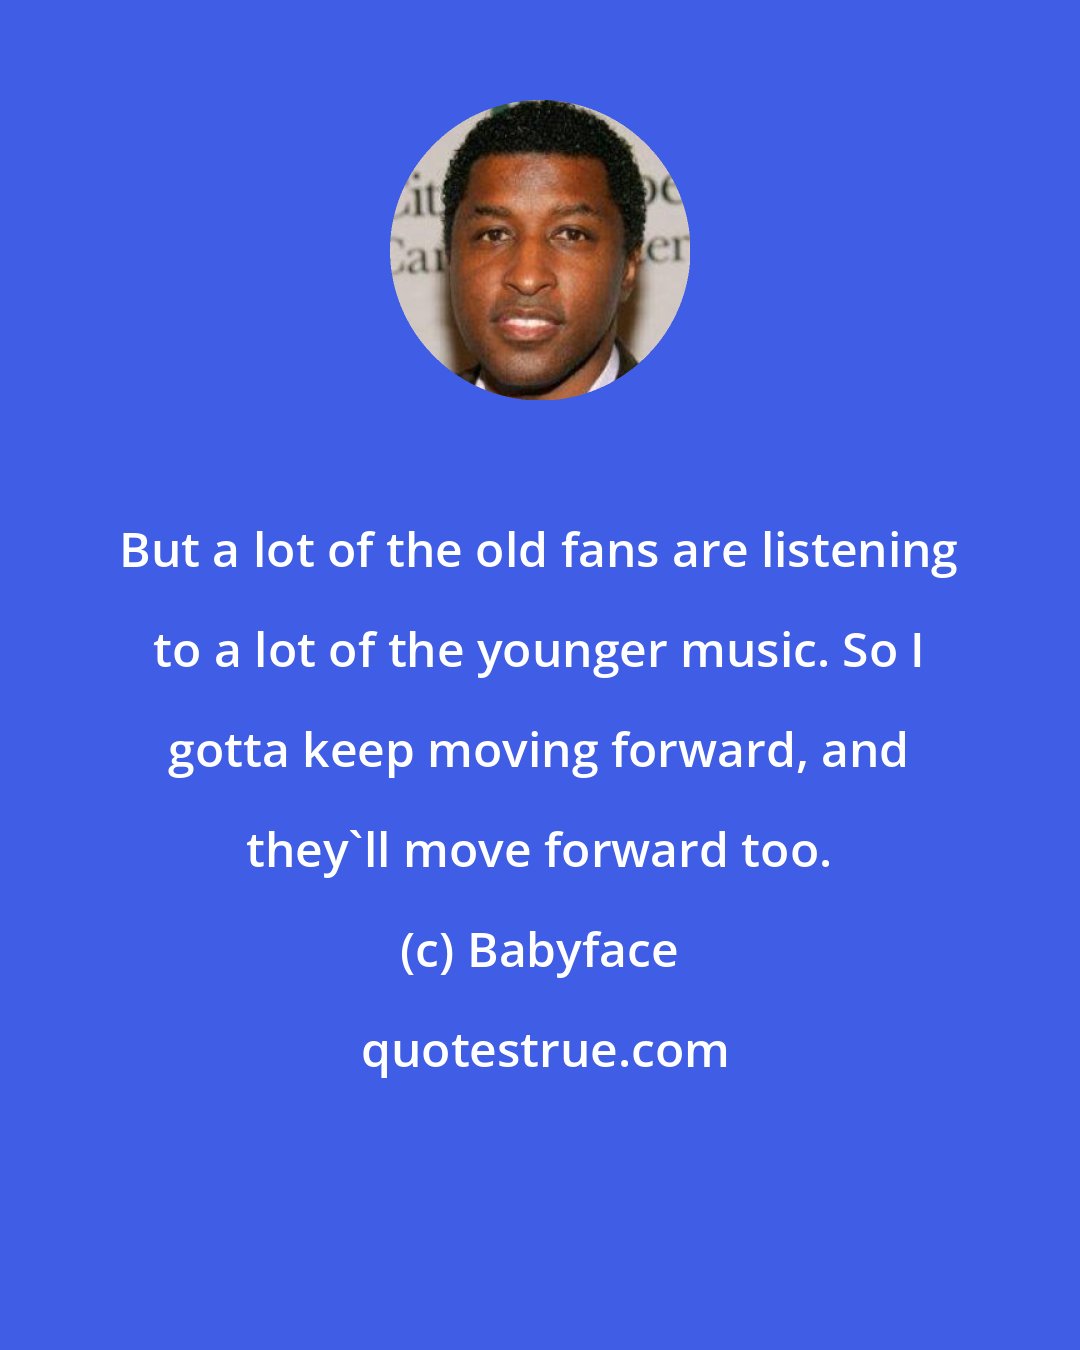 Babyface: But a lot of the old fans are listening to a lot of the younger music. So I gotta keep moving forward, and they'll move forward too.